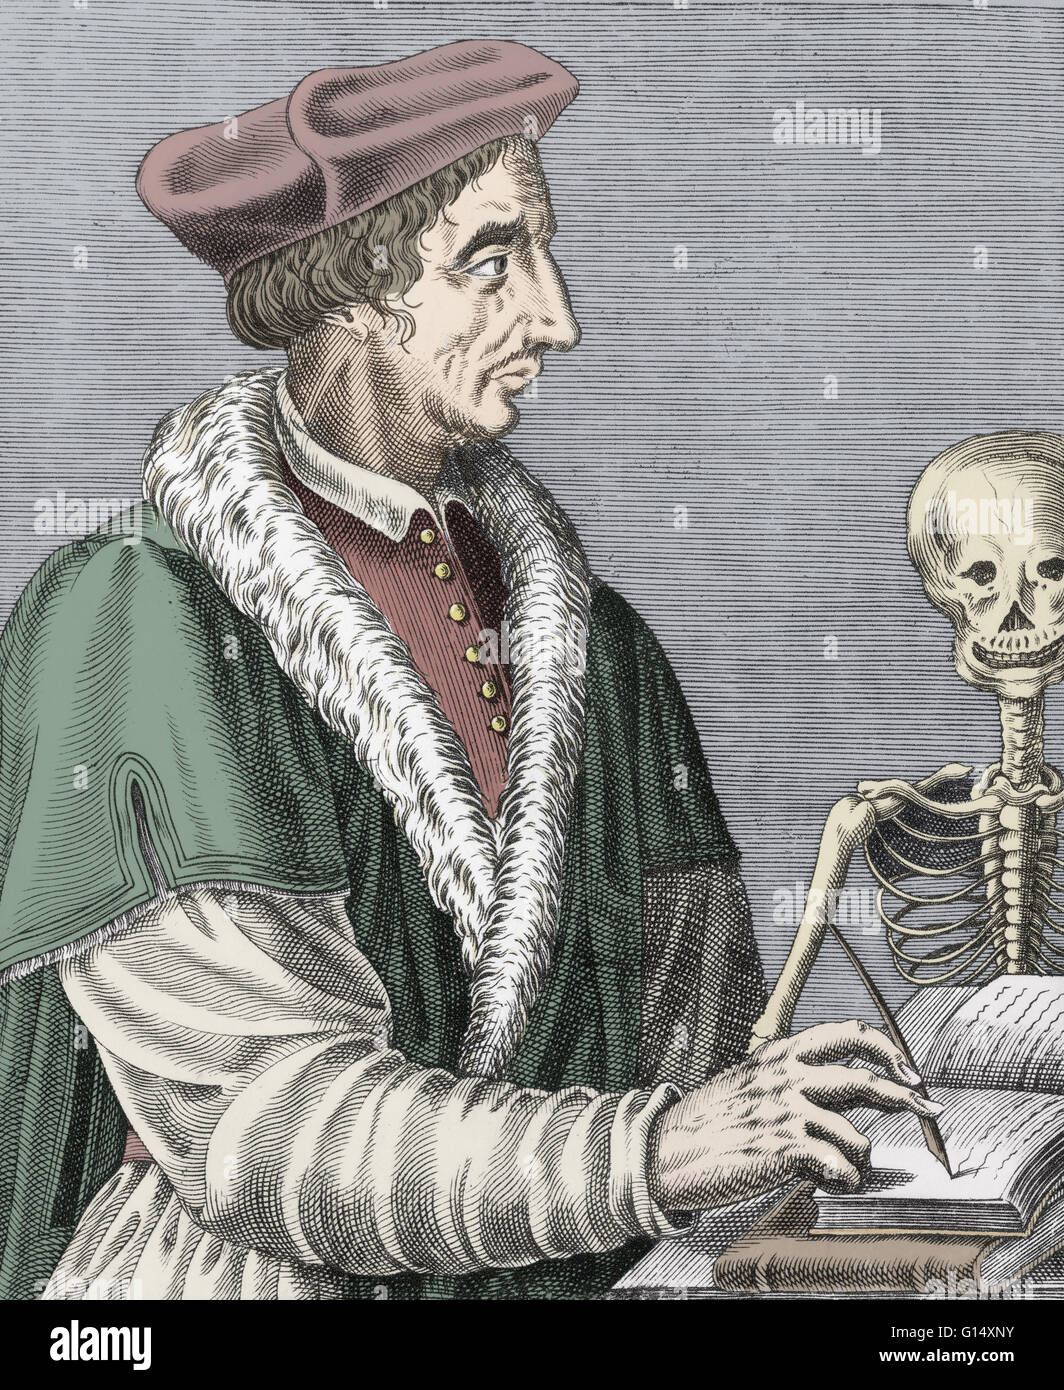 Jean Fernel (1497-1558) was a French physician who introduced the term physiology to describe the study of the body's function. He was the first person to describe the spinal canal. Stock Photo